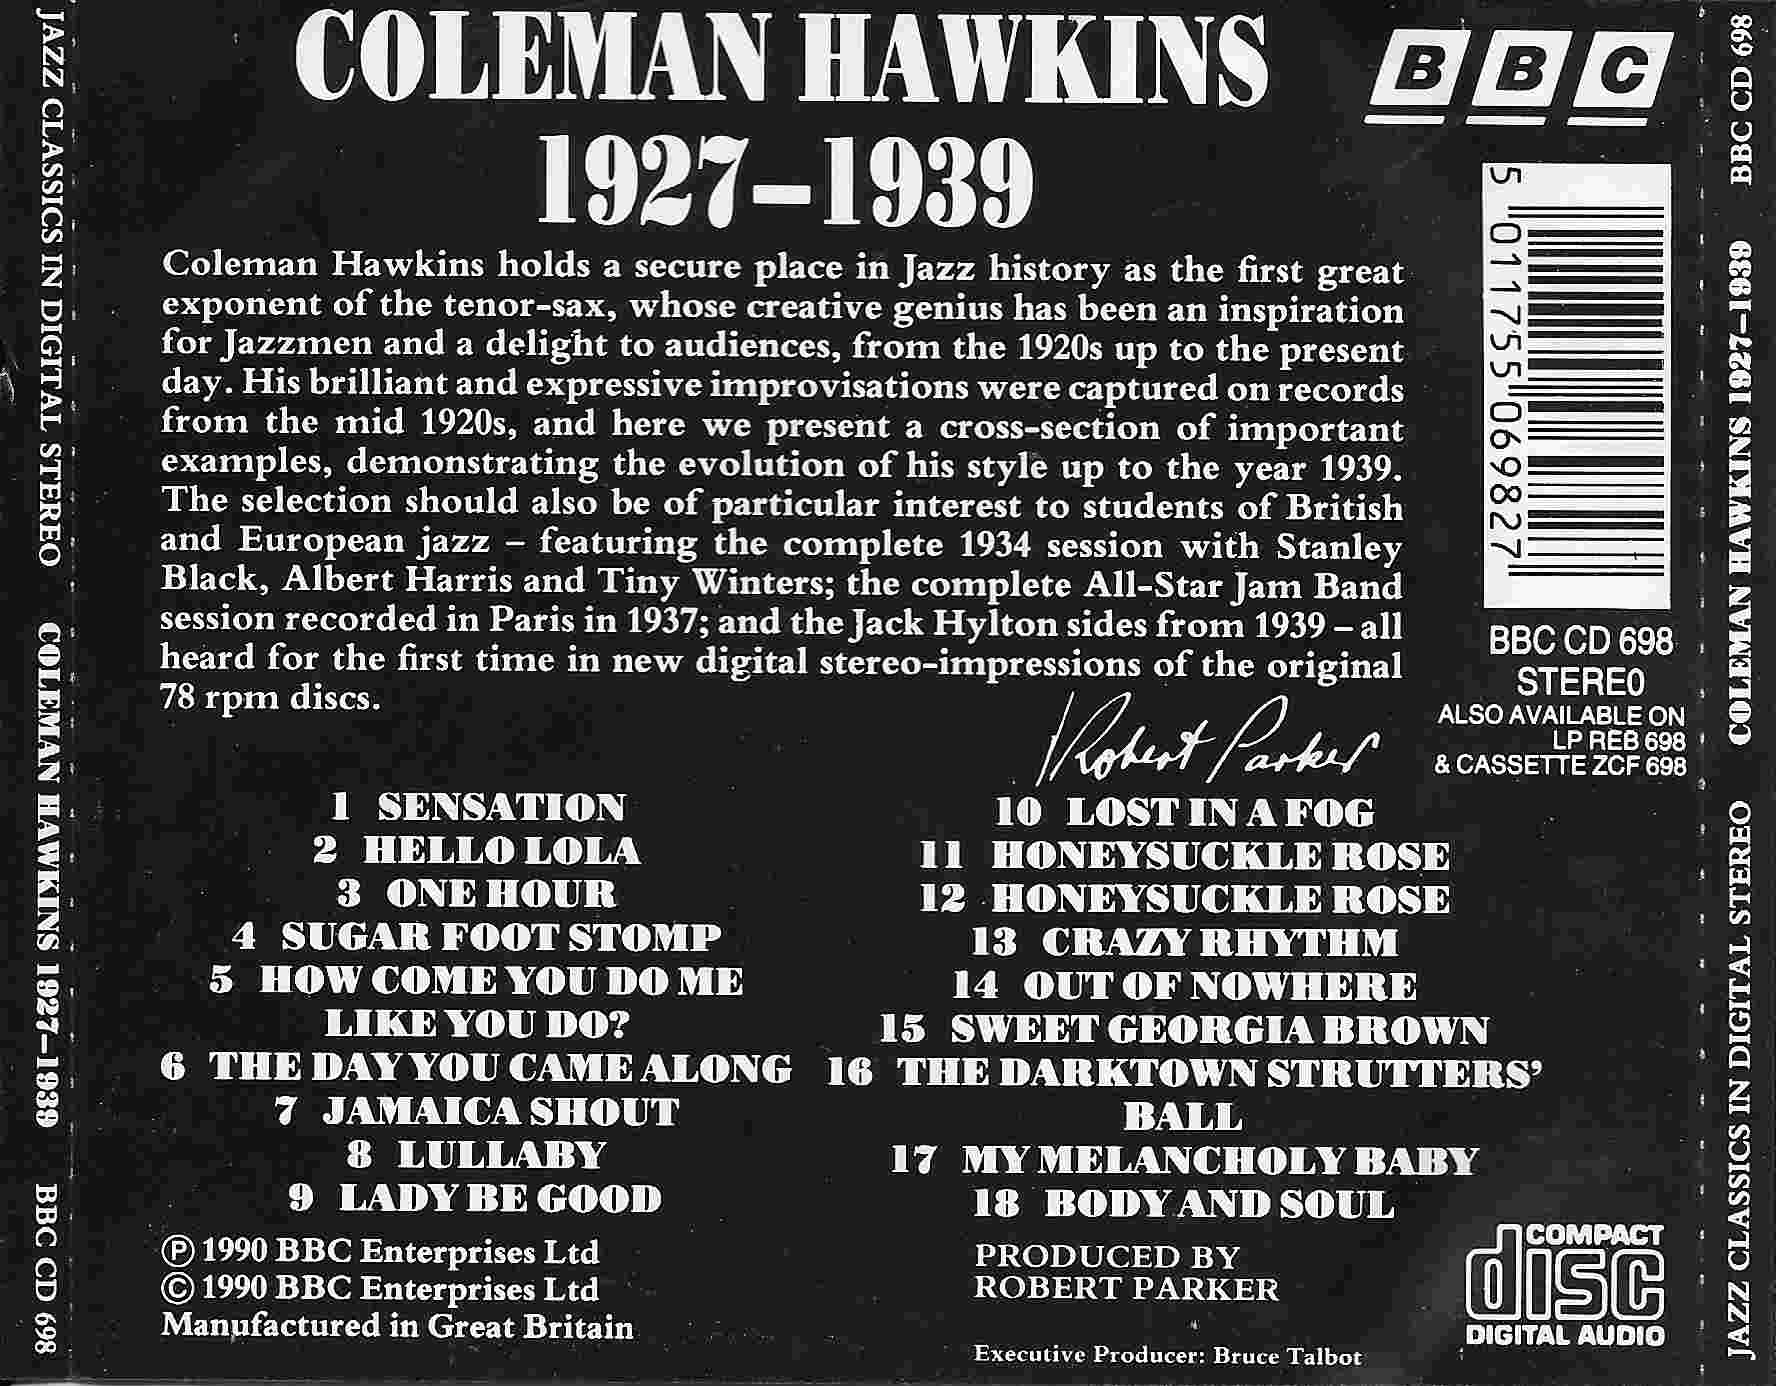 Picture of BBCCD698 Jazz classics - Coleman Hawkins by artist Coleman Hawkins from the BBC records and Tapes library